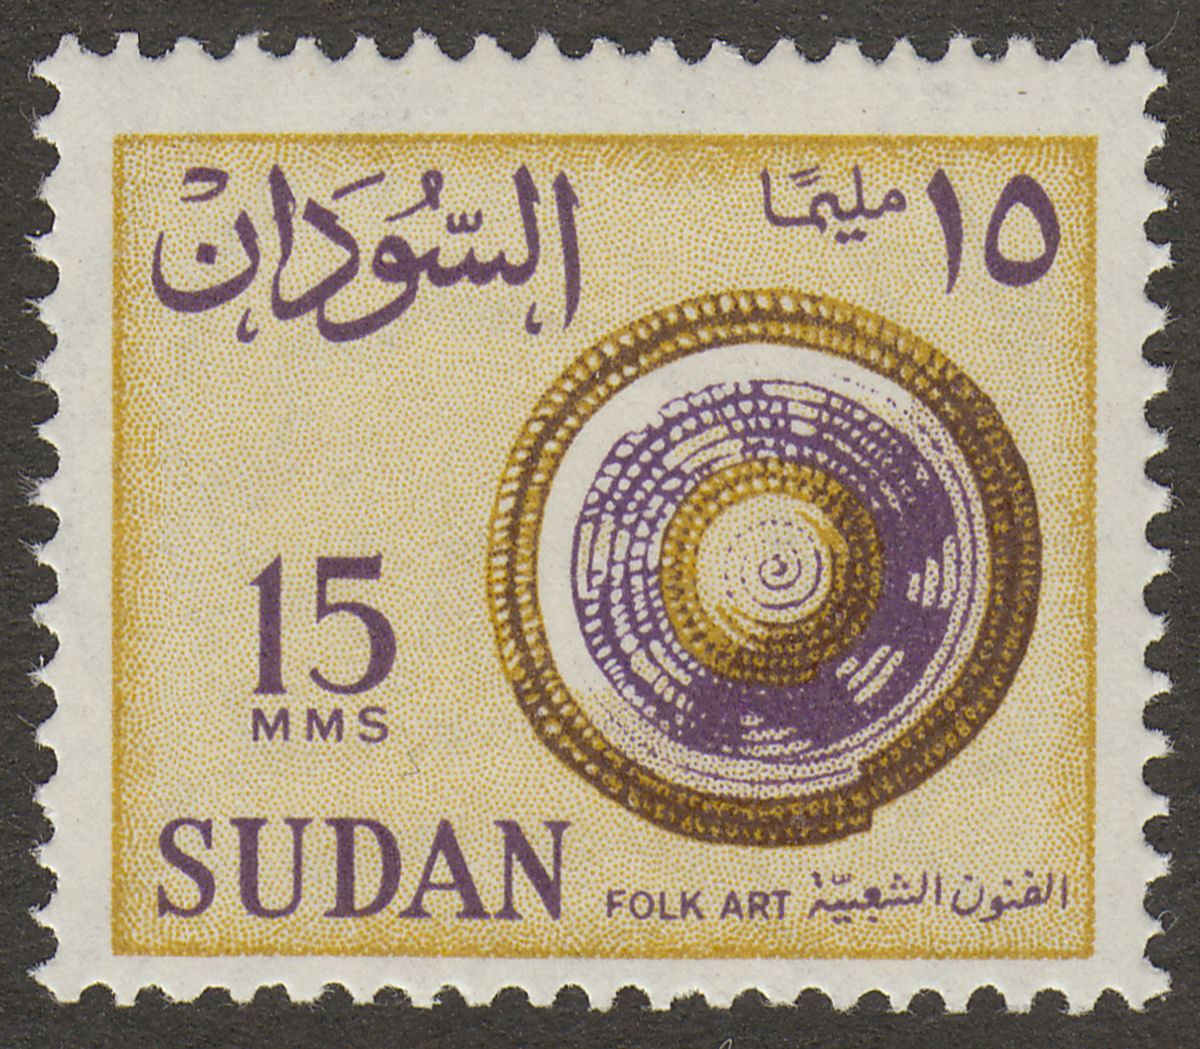 Sudan 1962 Food Cover 15m w Orange Omitted Variety UM Mint SG173a MNH ...